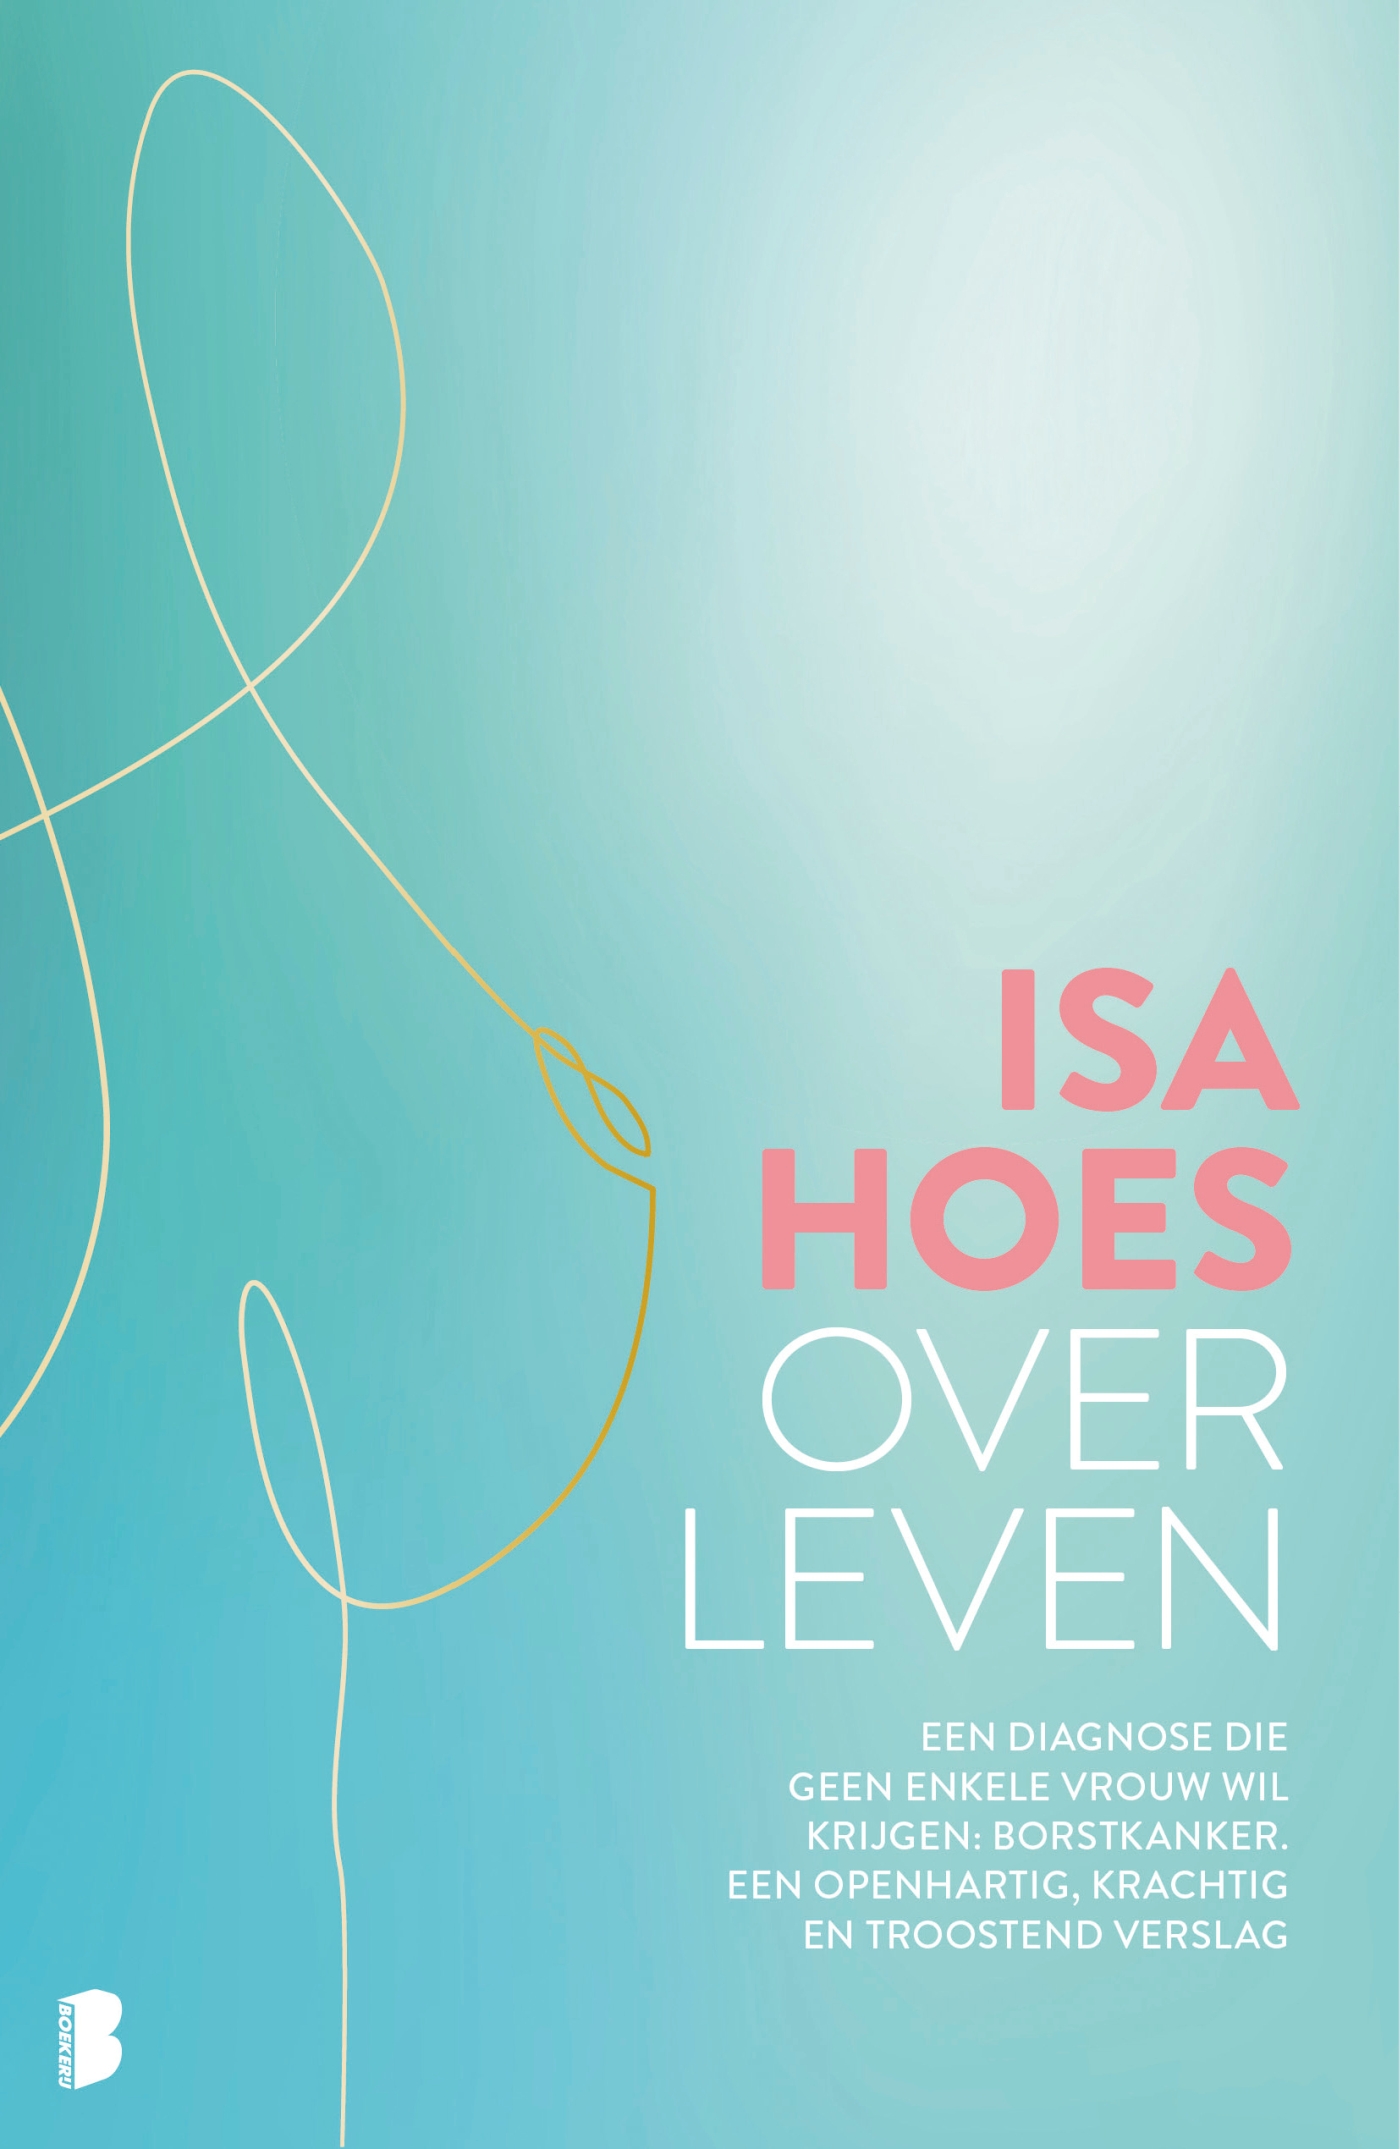 Hoes, Isa-Over leven